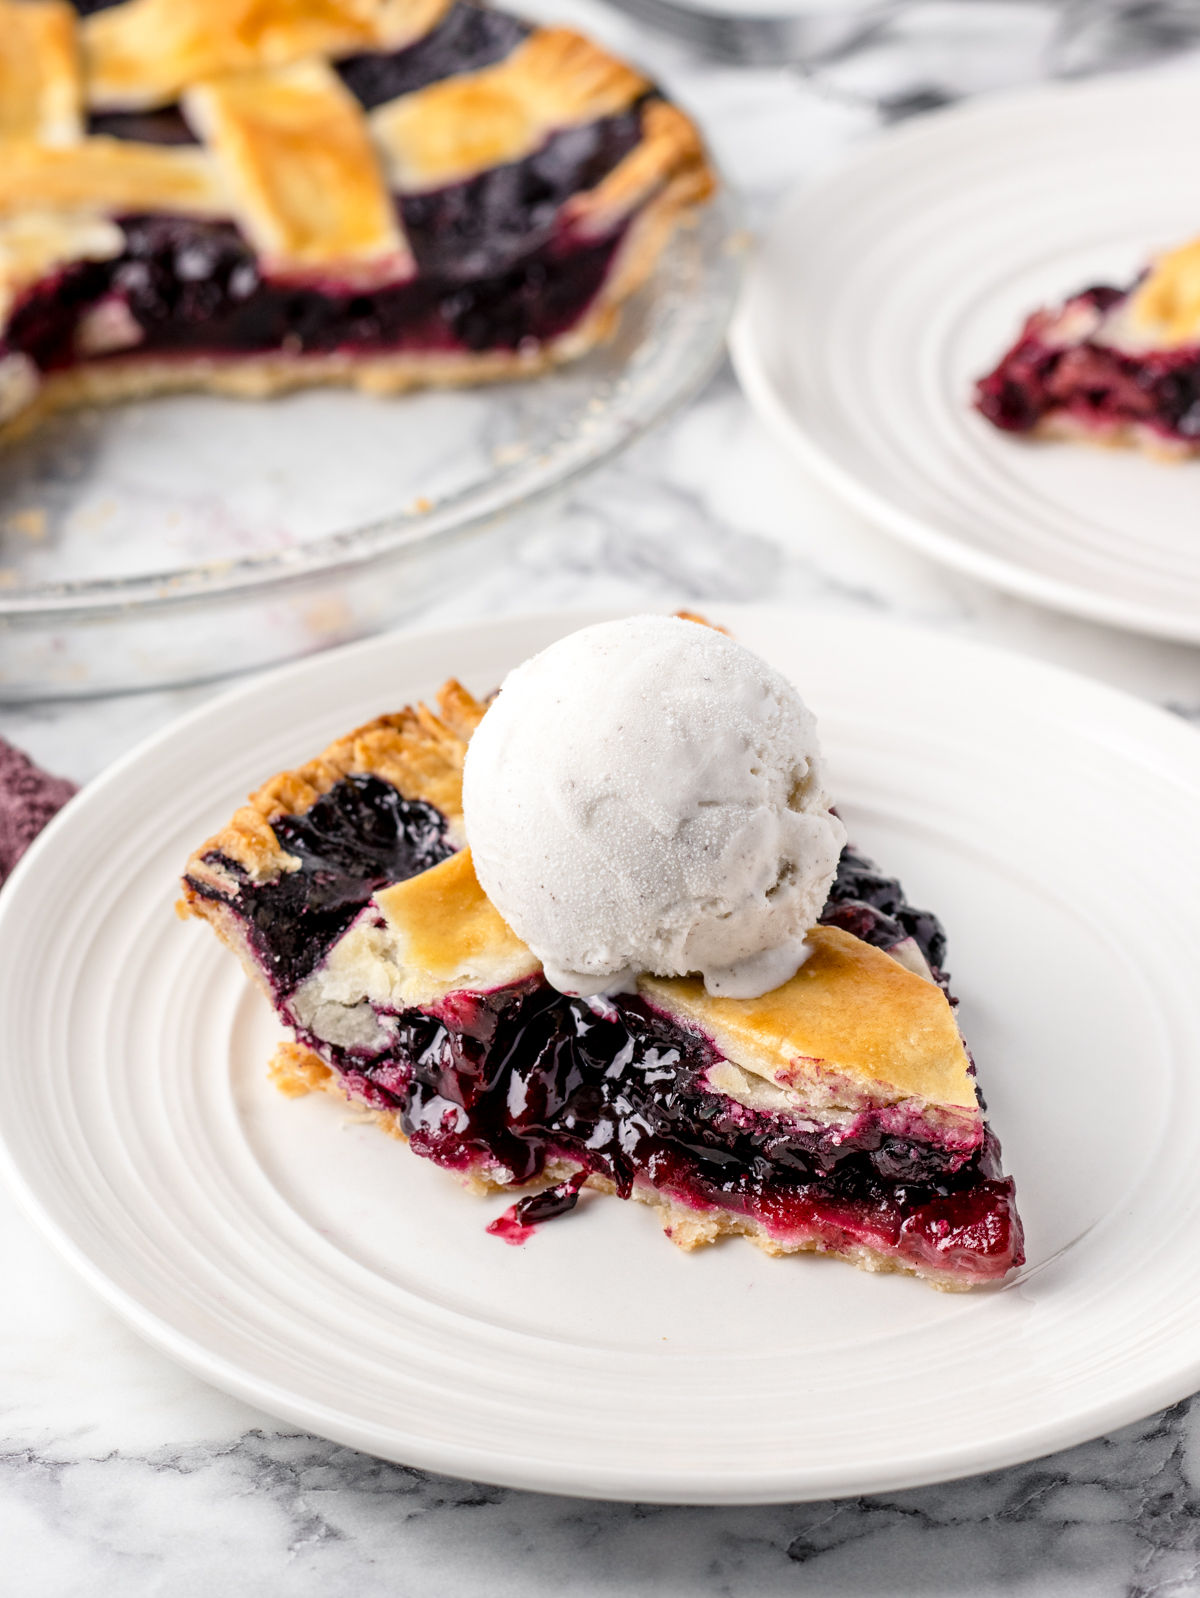 Strawberry Blueberry Pie with ice cream scooped on top.